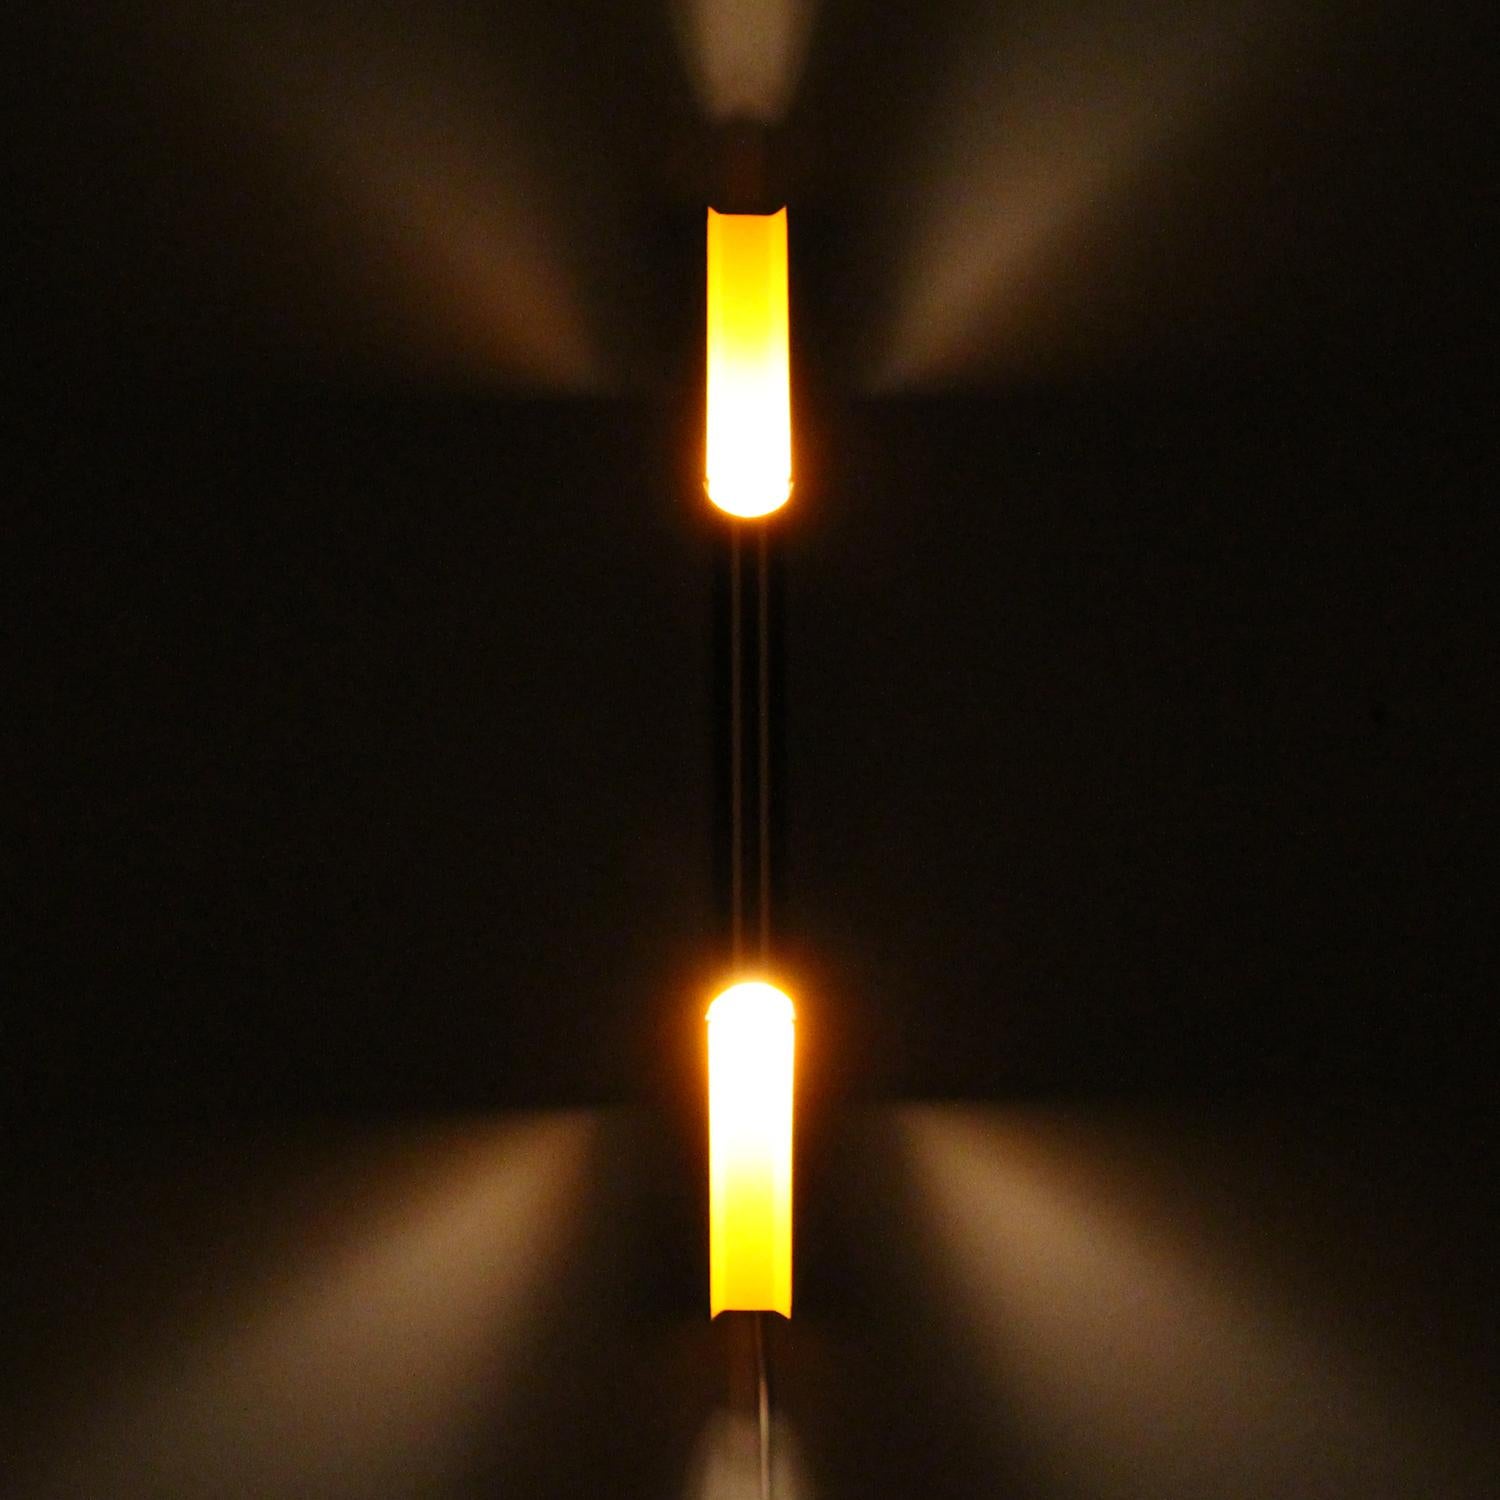 Pan-Opticon - an elegant Danish modern sconce designed by Bent Karlby in 1968-1969 and produced by LYFA - aluminum wall lamp with yellow inner in excellent vintage condition.

The Pan-Opticon is made up of a long narrow aluminum 'pan-flute' piece